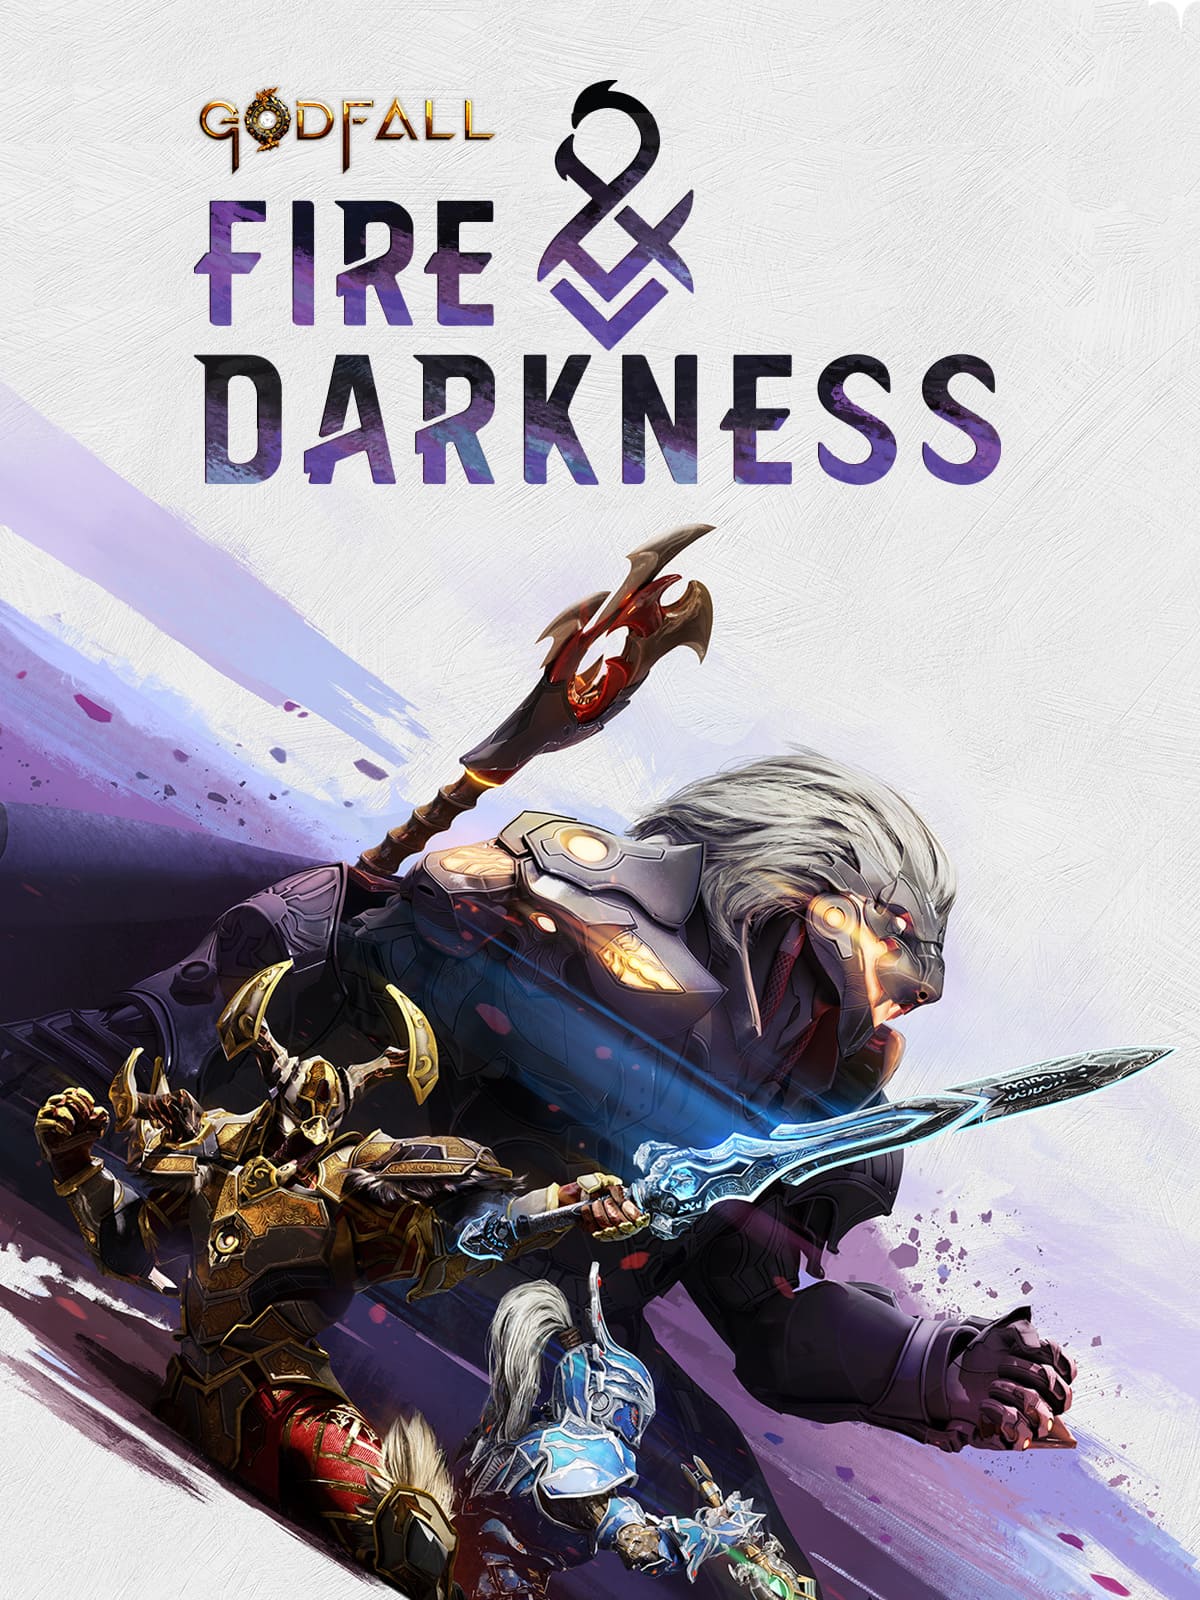 Cover art for the Godfall: Fire and Darkness game DLC.